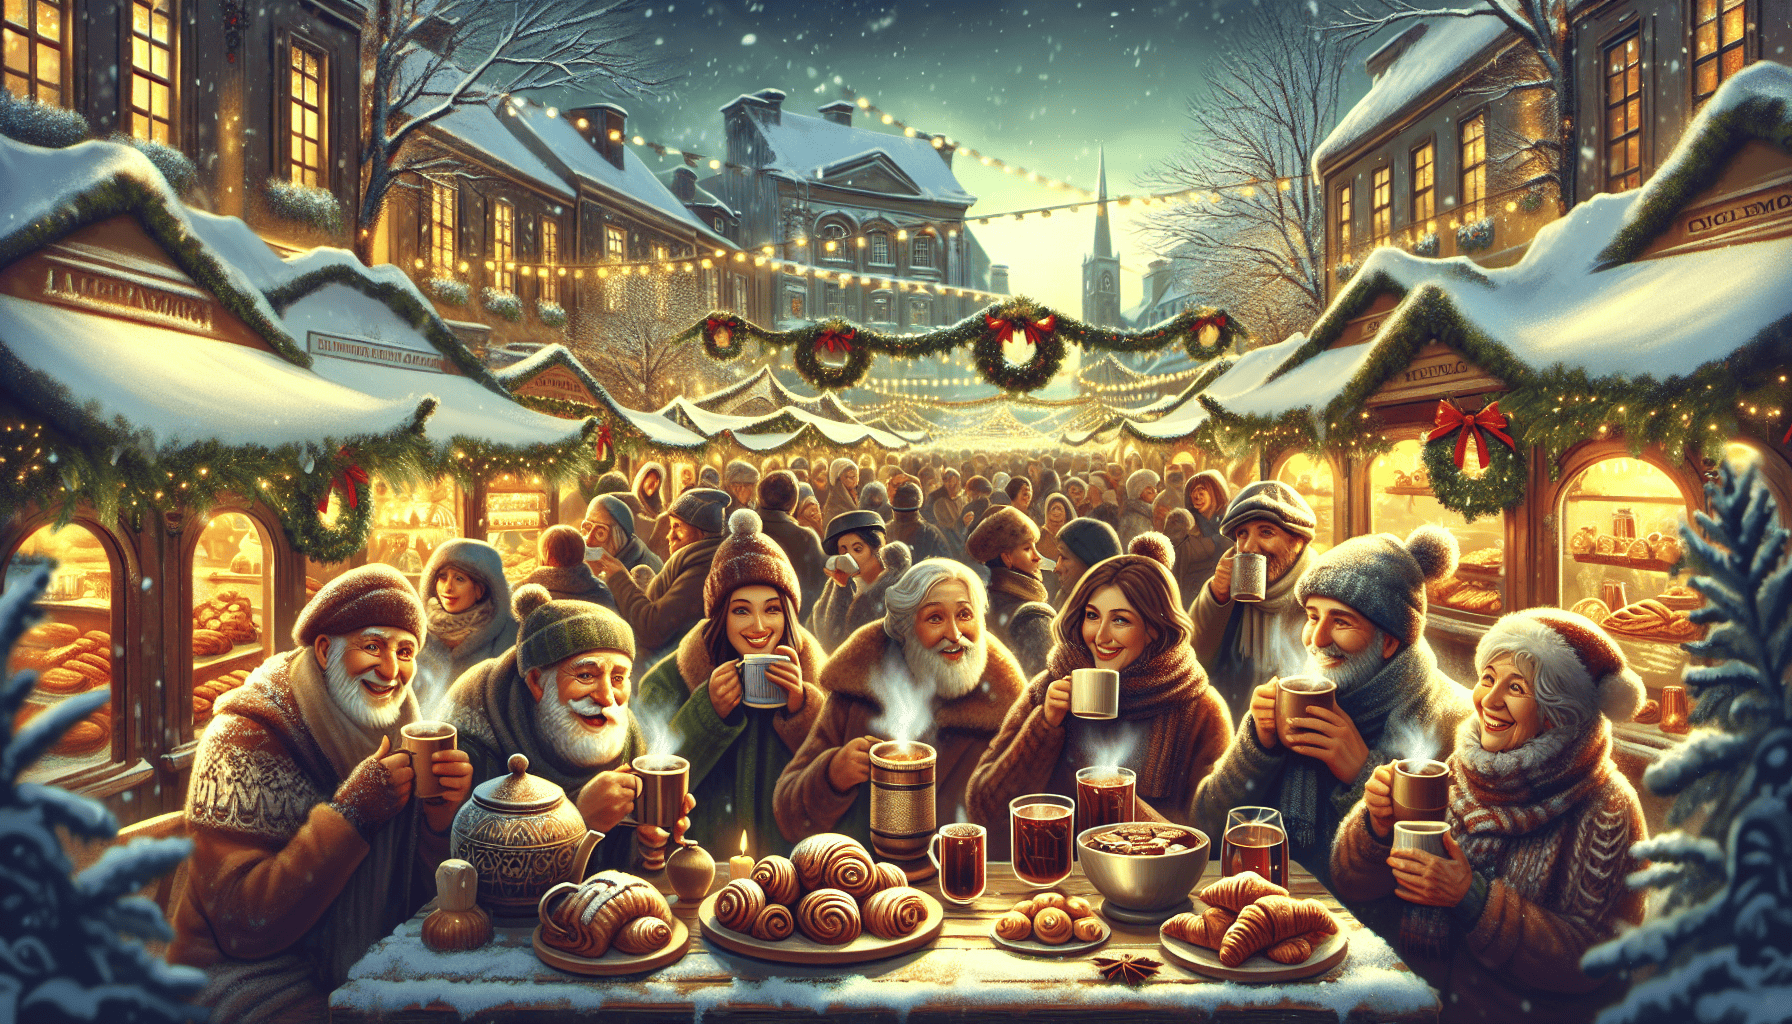 Festive food and beverages at a Christmas market